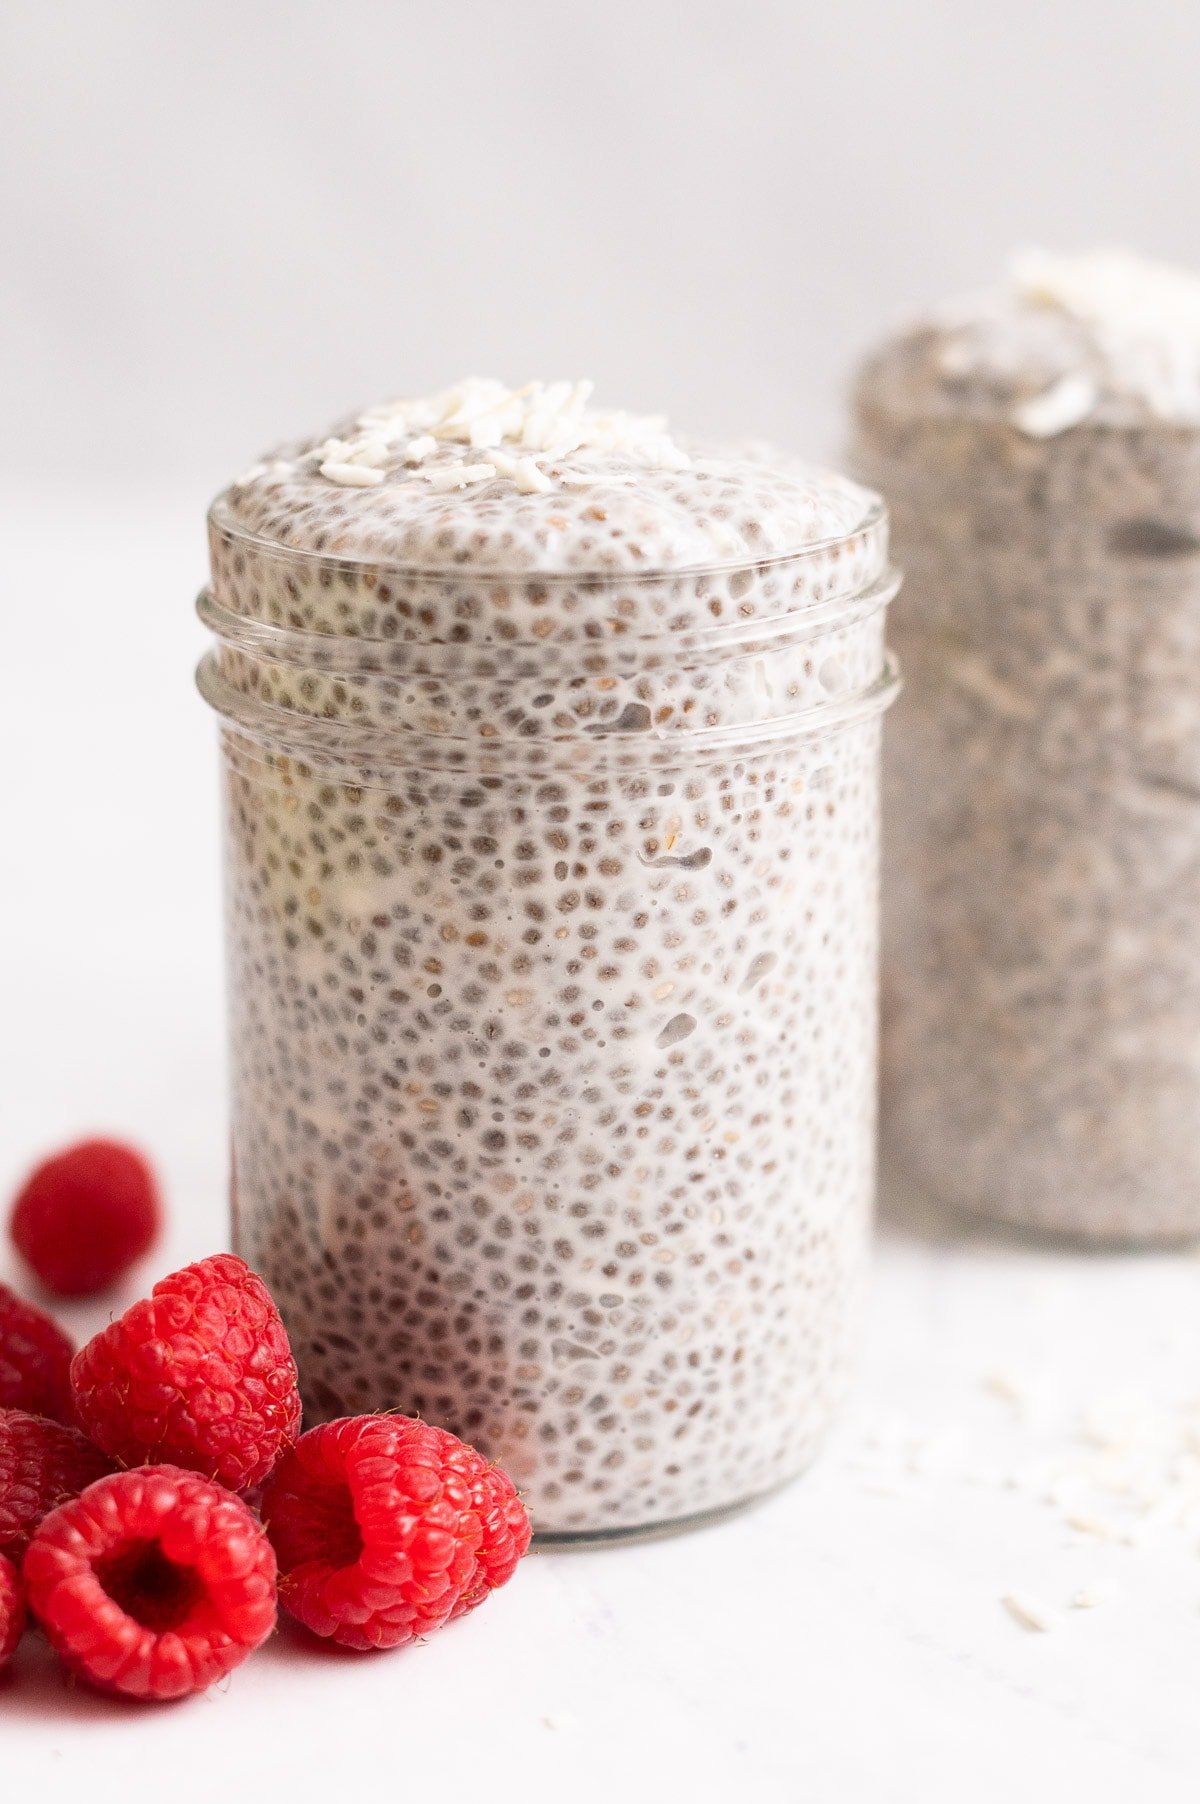 Coconut milk chia pudding topped with coconut flakes in mason jars and fresh raspberries on a counter.